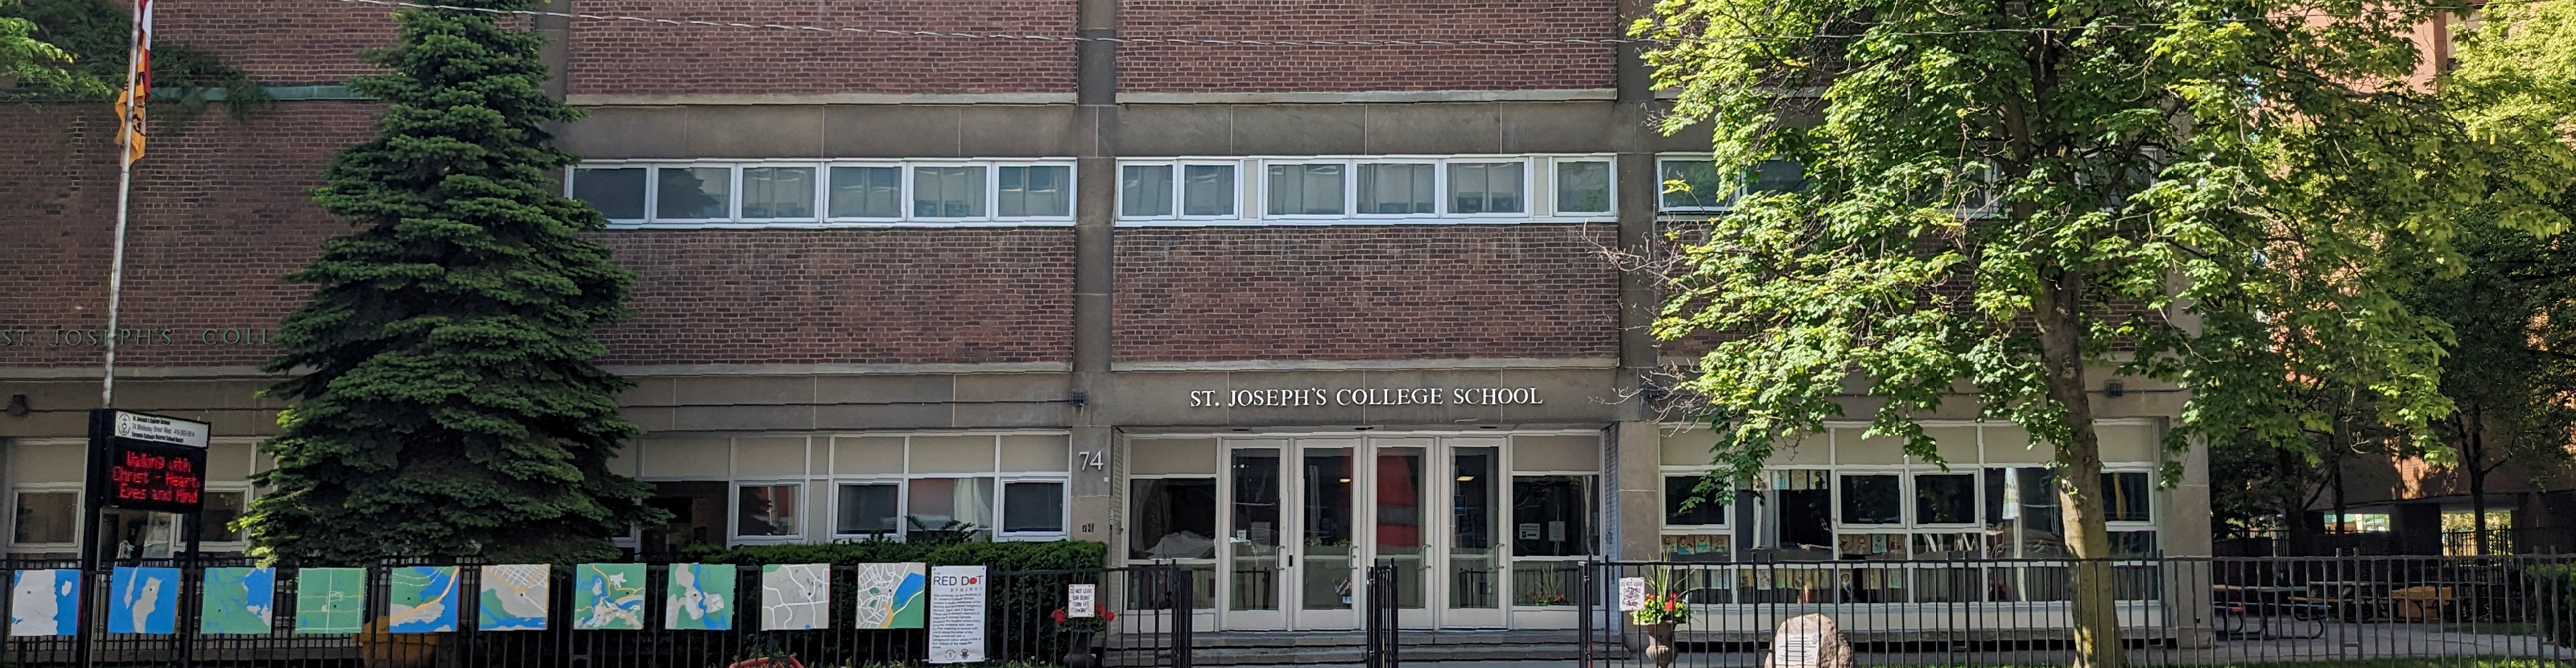 The front entrance of the St. Joseph's College School building. 